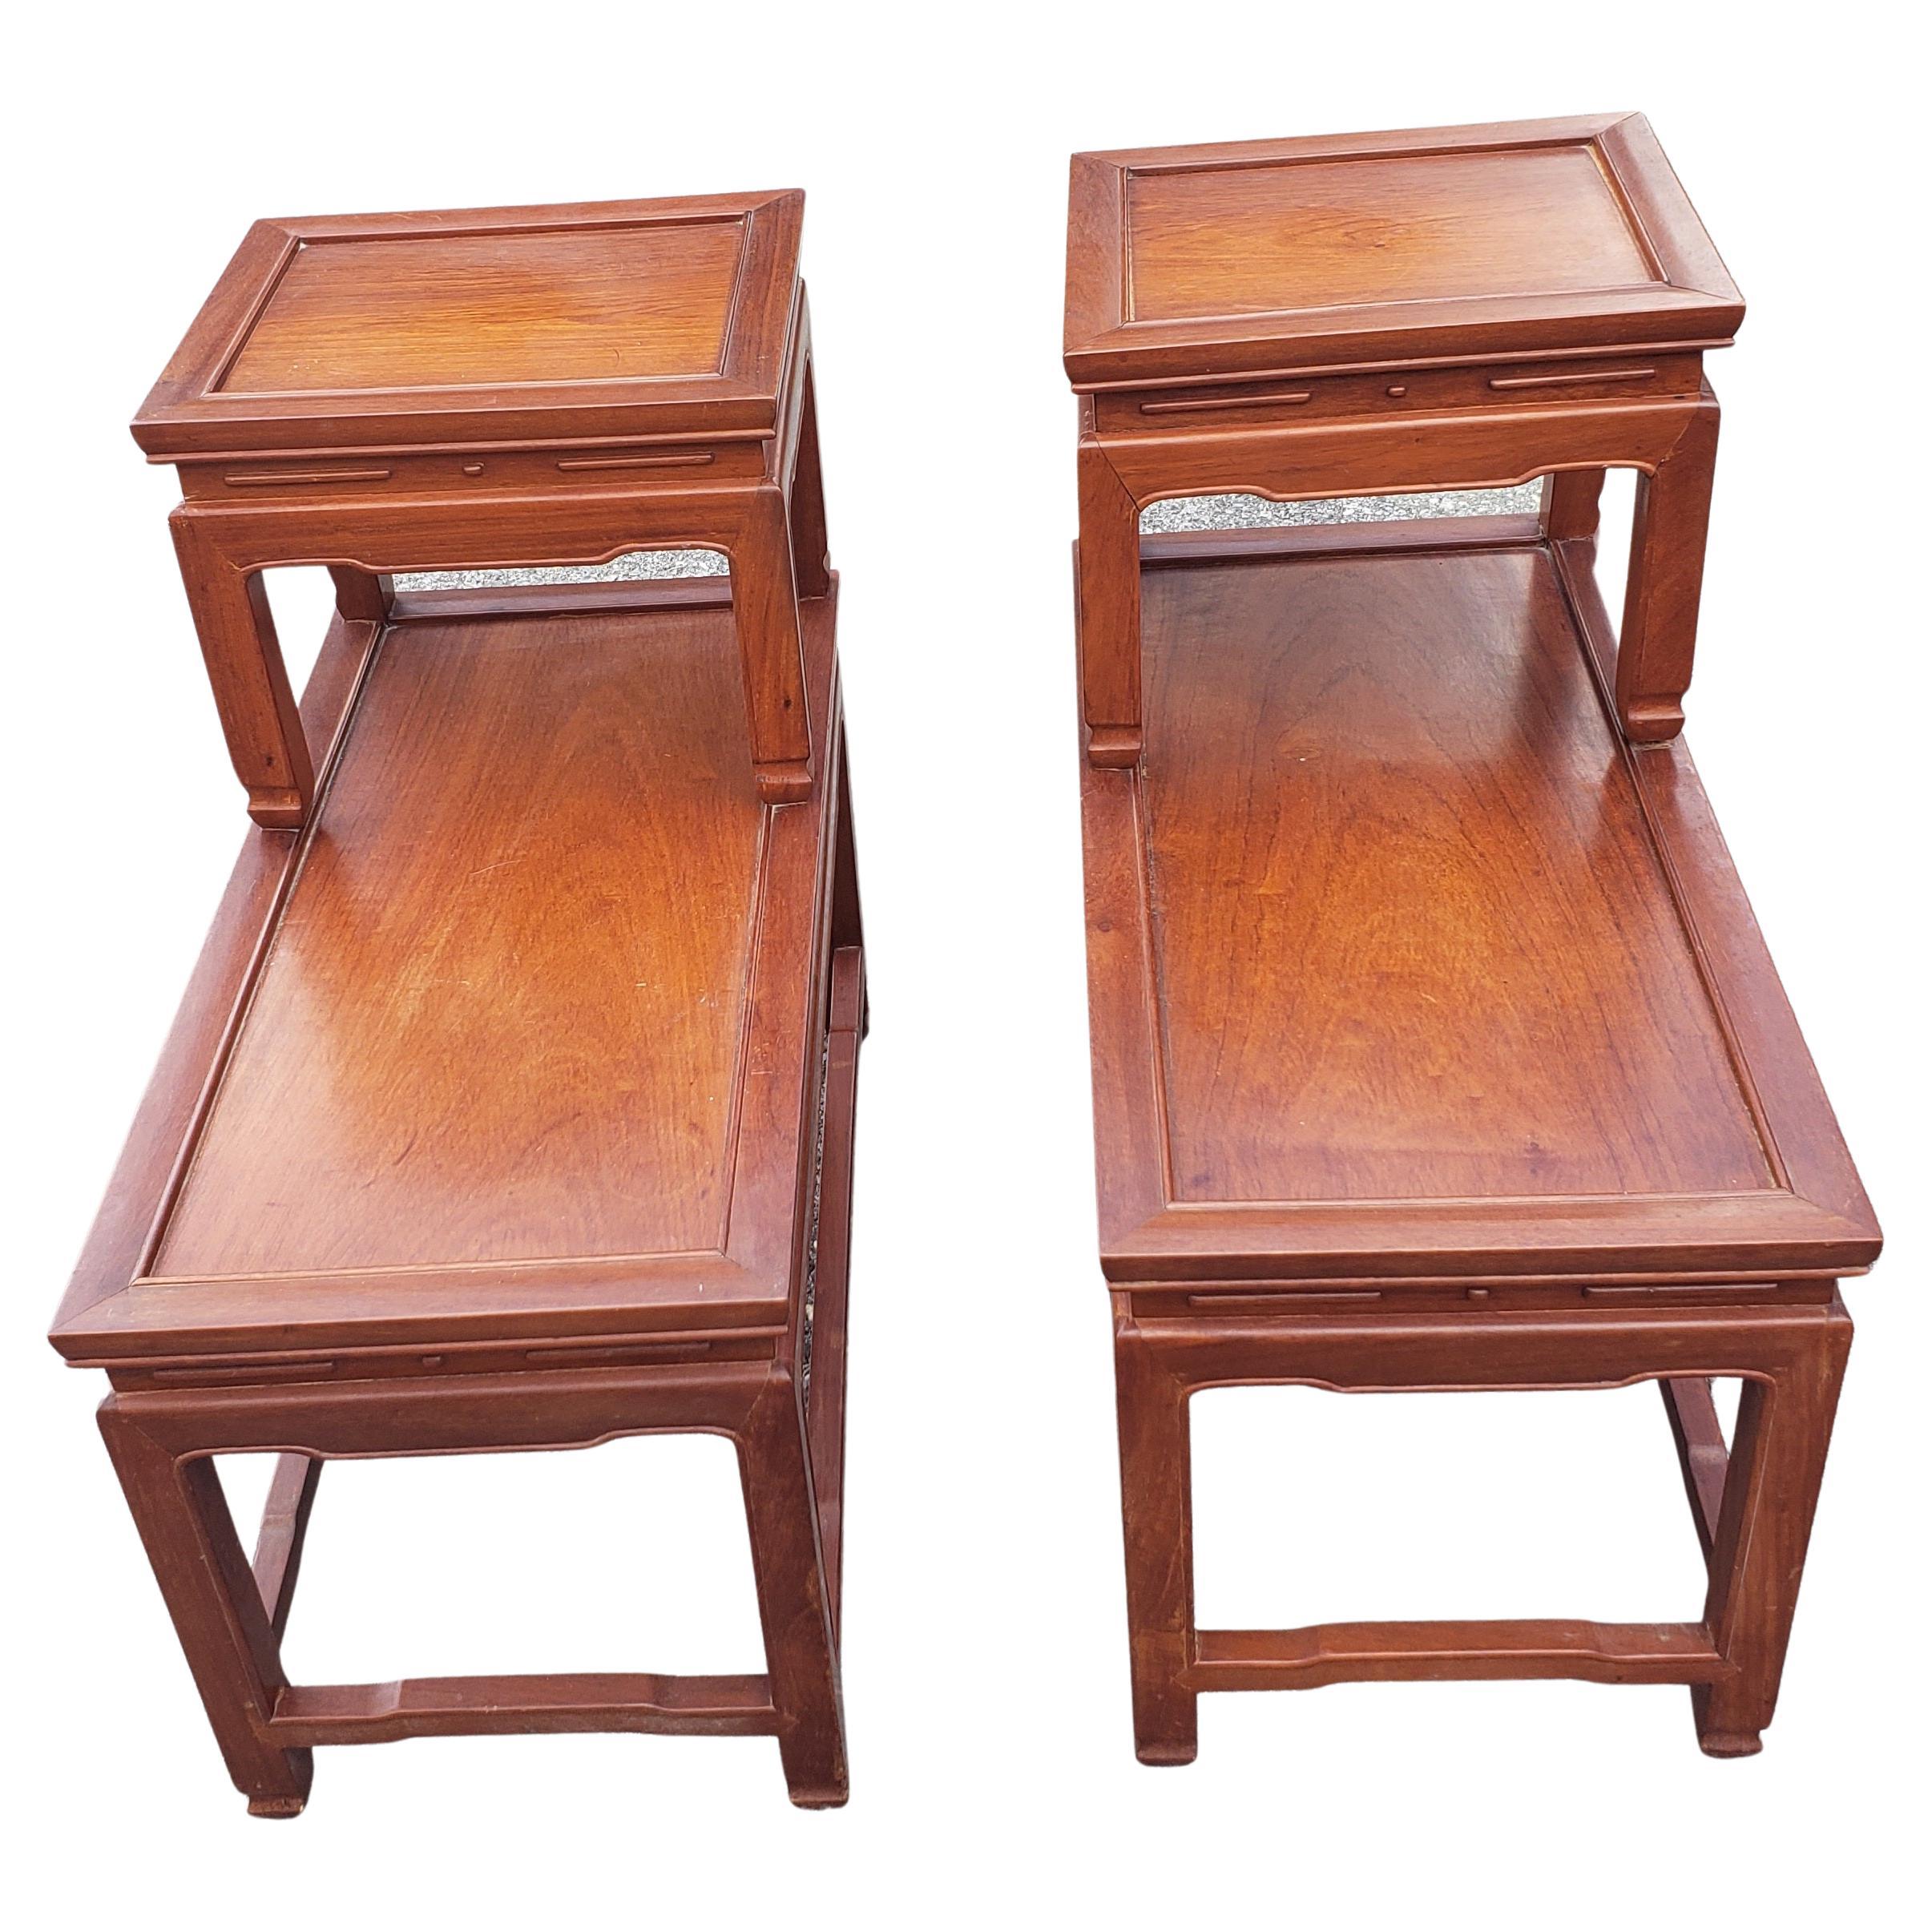 Hong Kong Pair of George Zee Two Tier Rosewood End Tables, circa 1960s For Sale